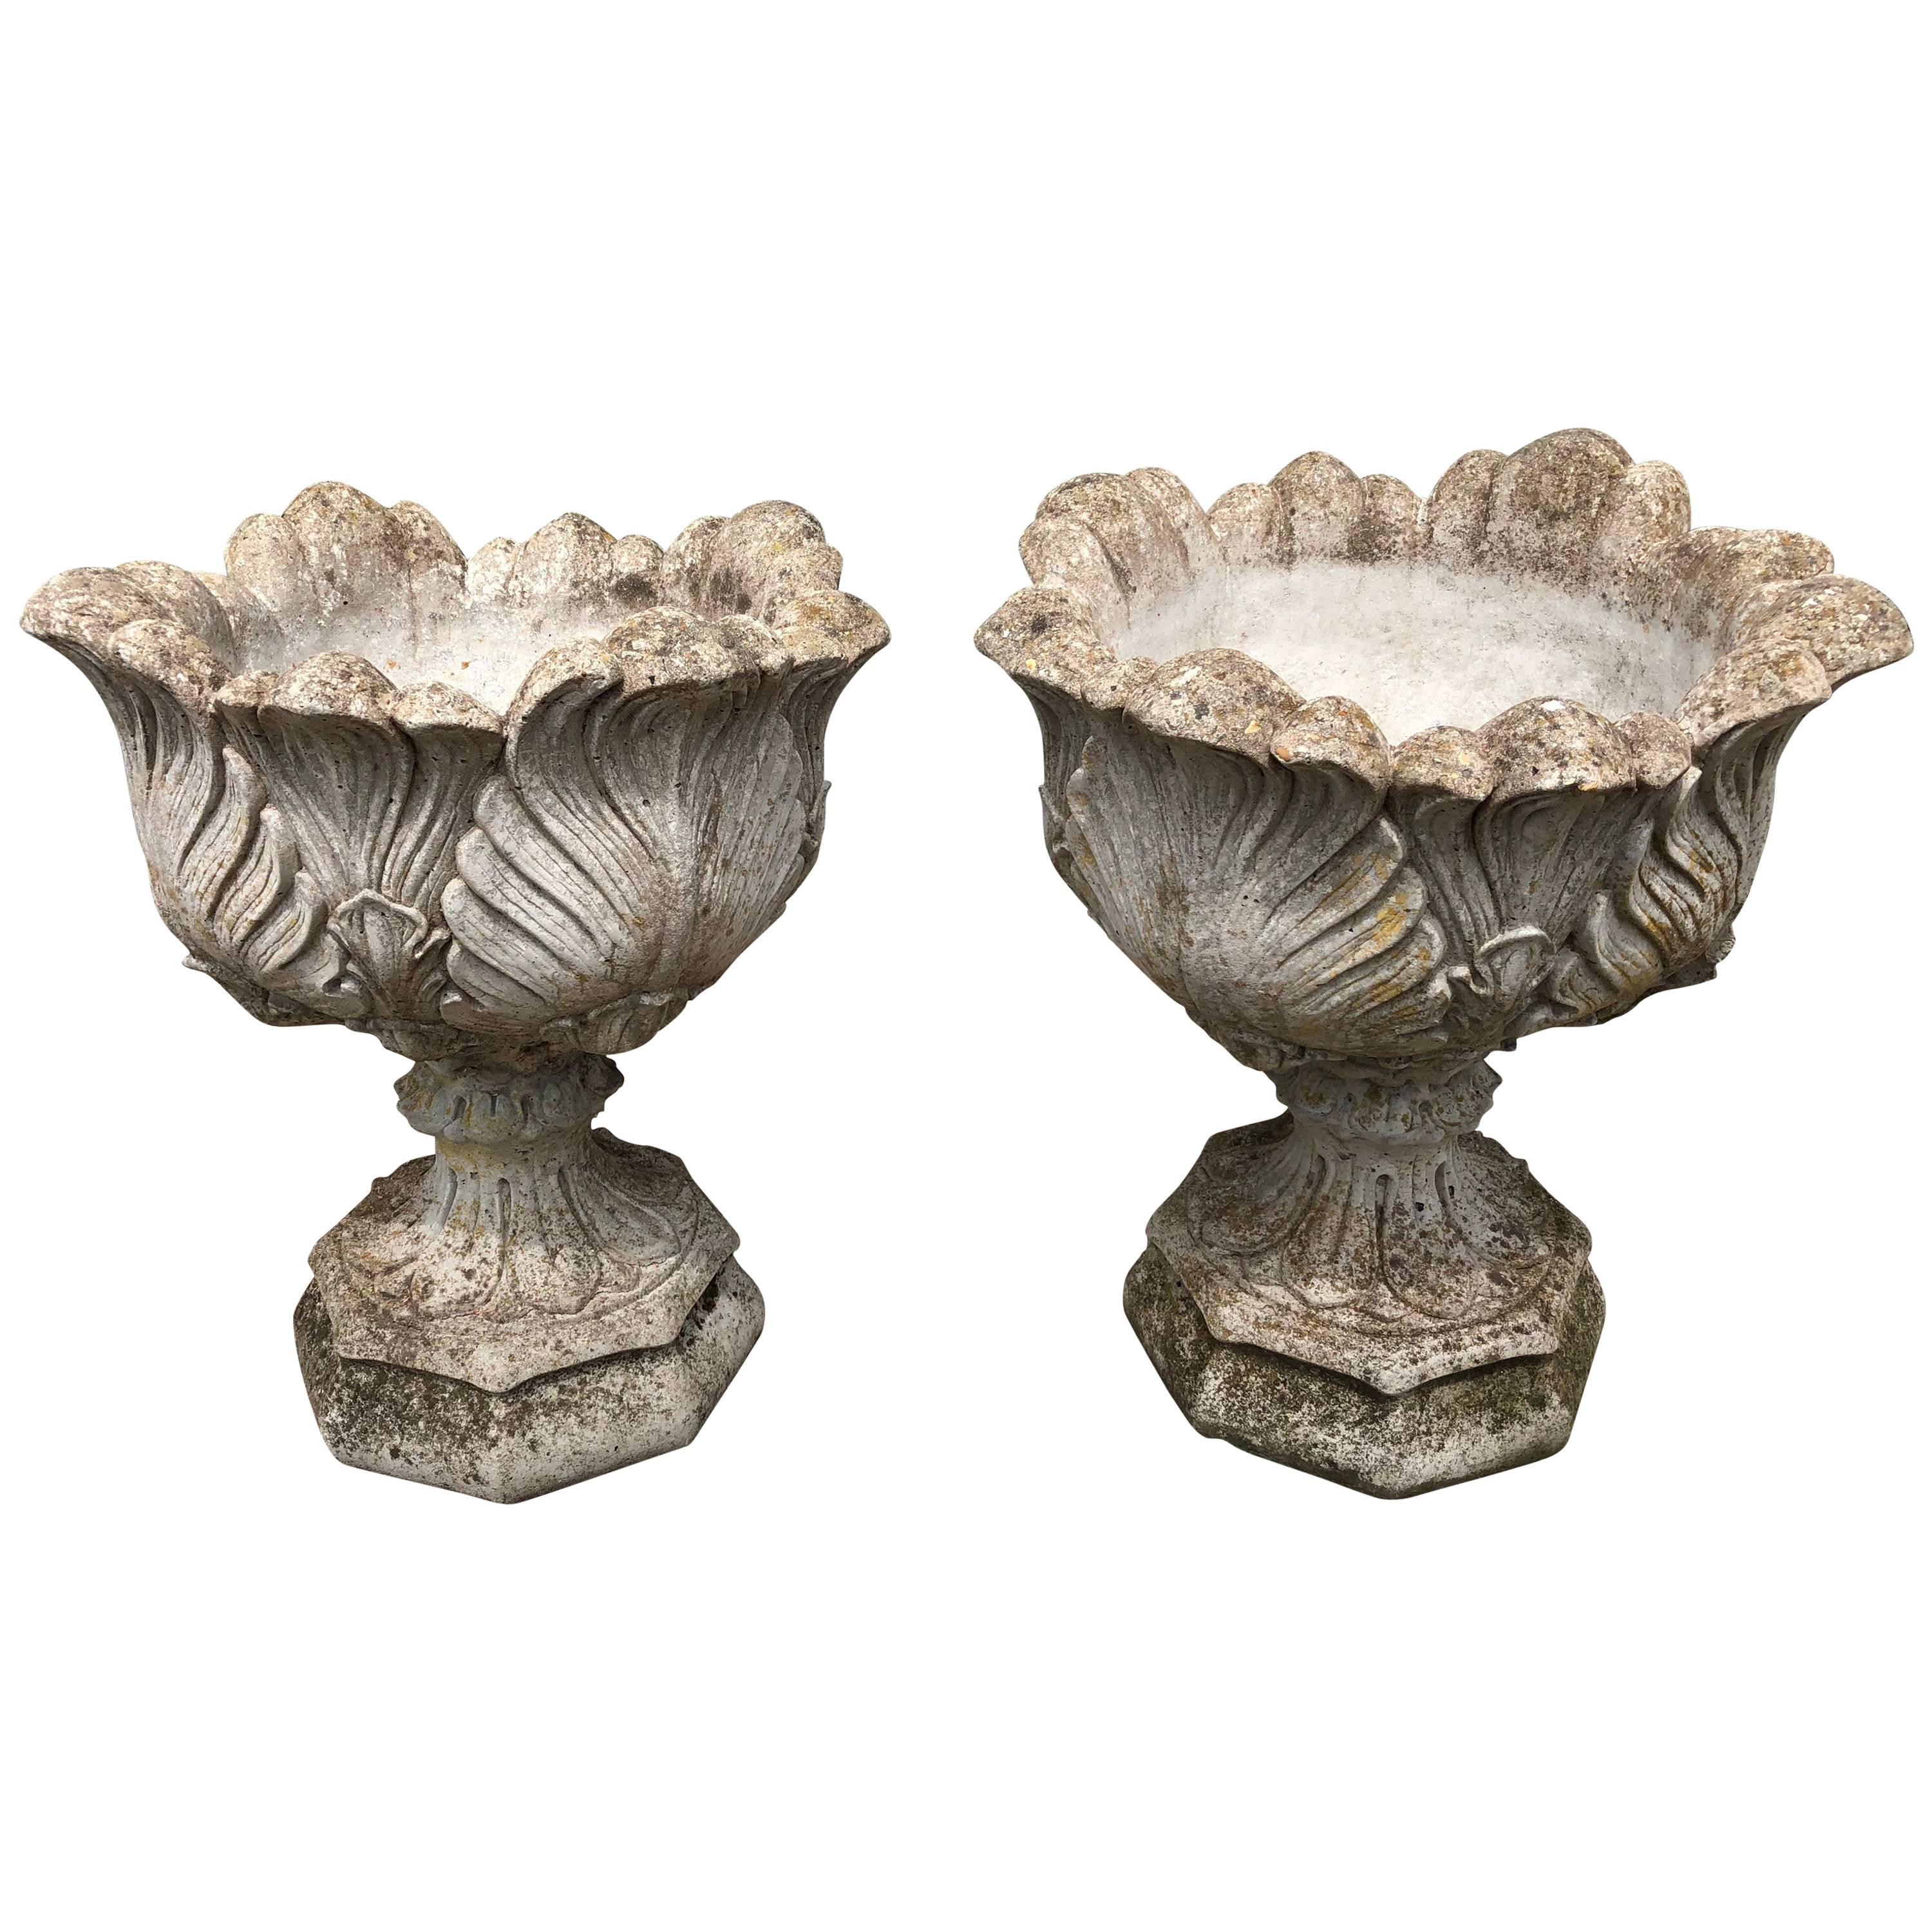 Pair of English Acanthus-Leaf Cast Stone Urns